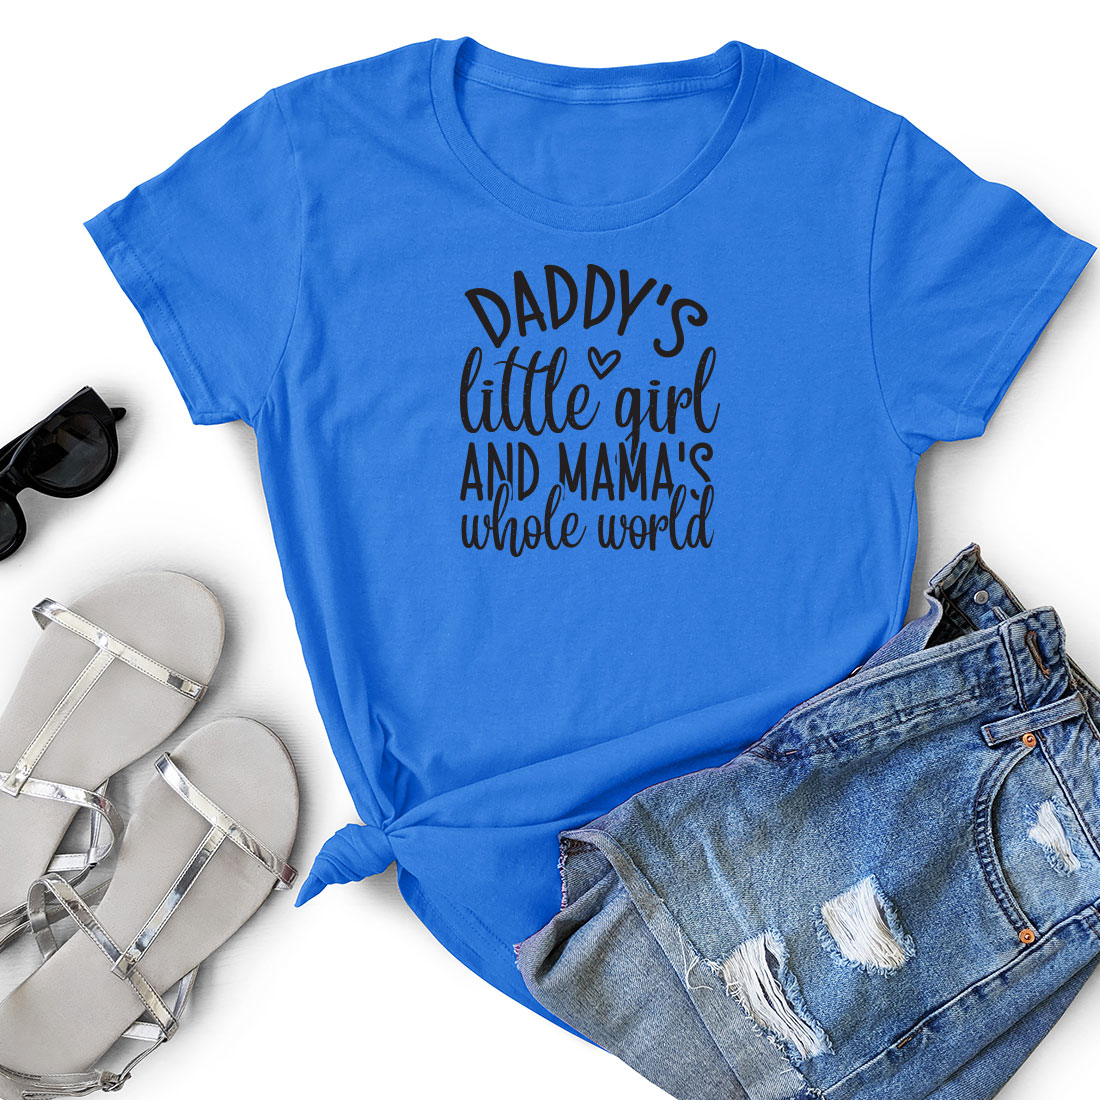 T - shirt that says daddy's little girl and mamas whole world.